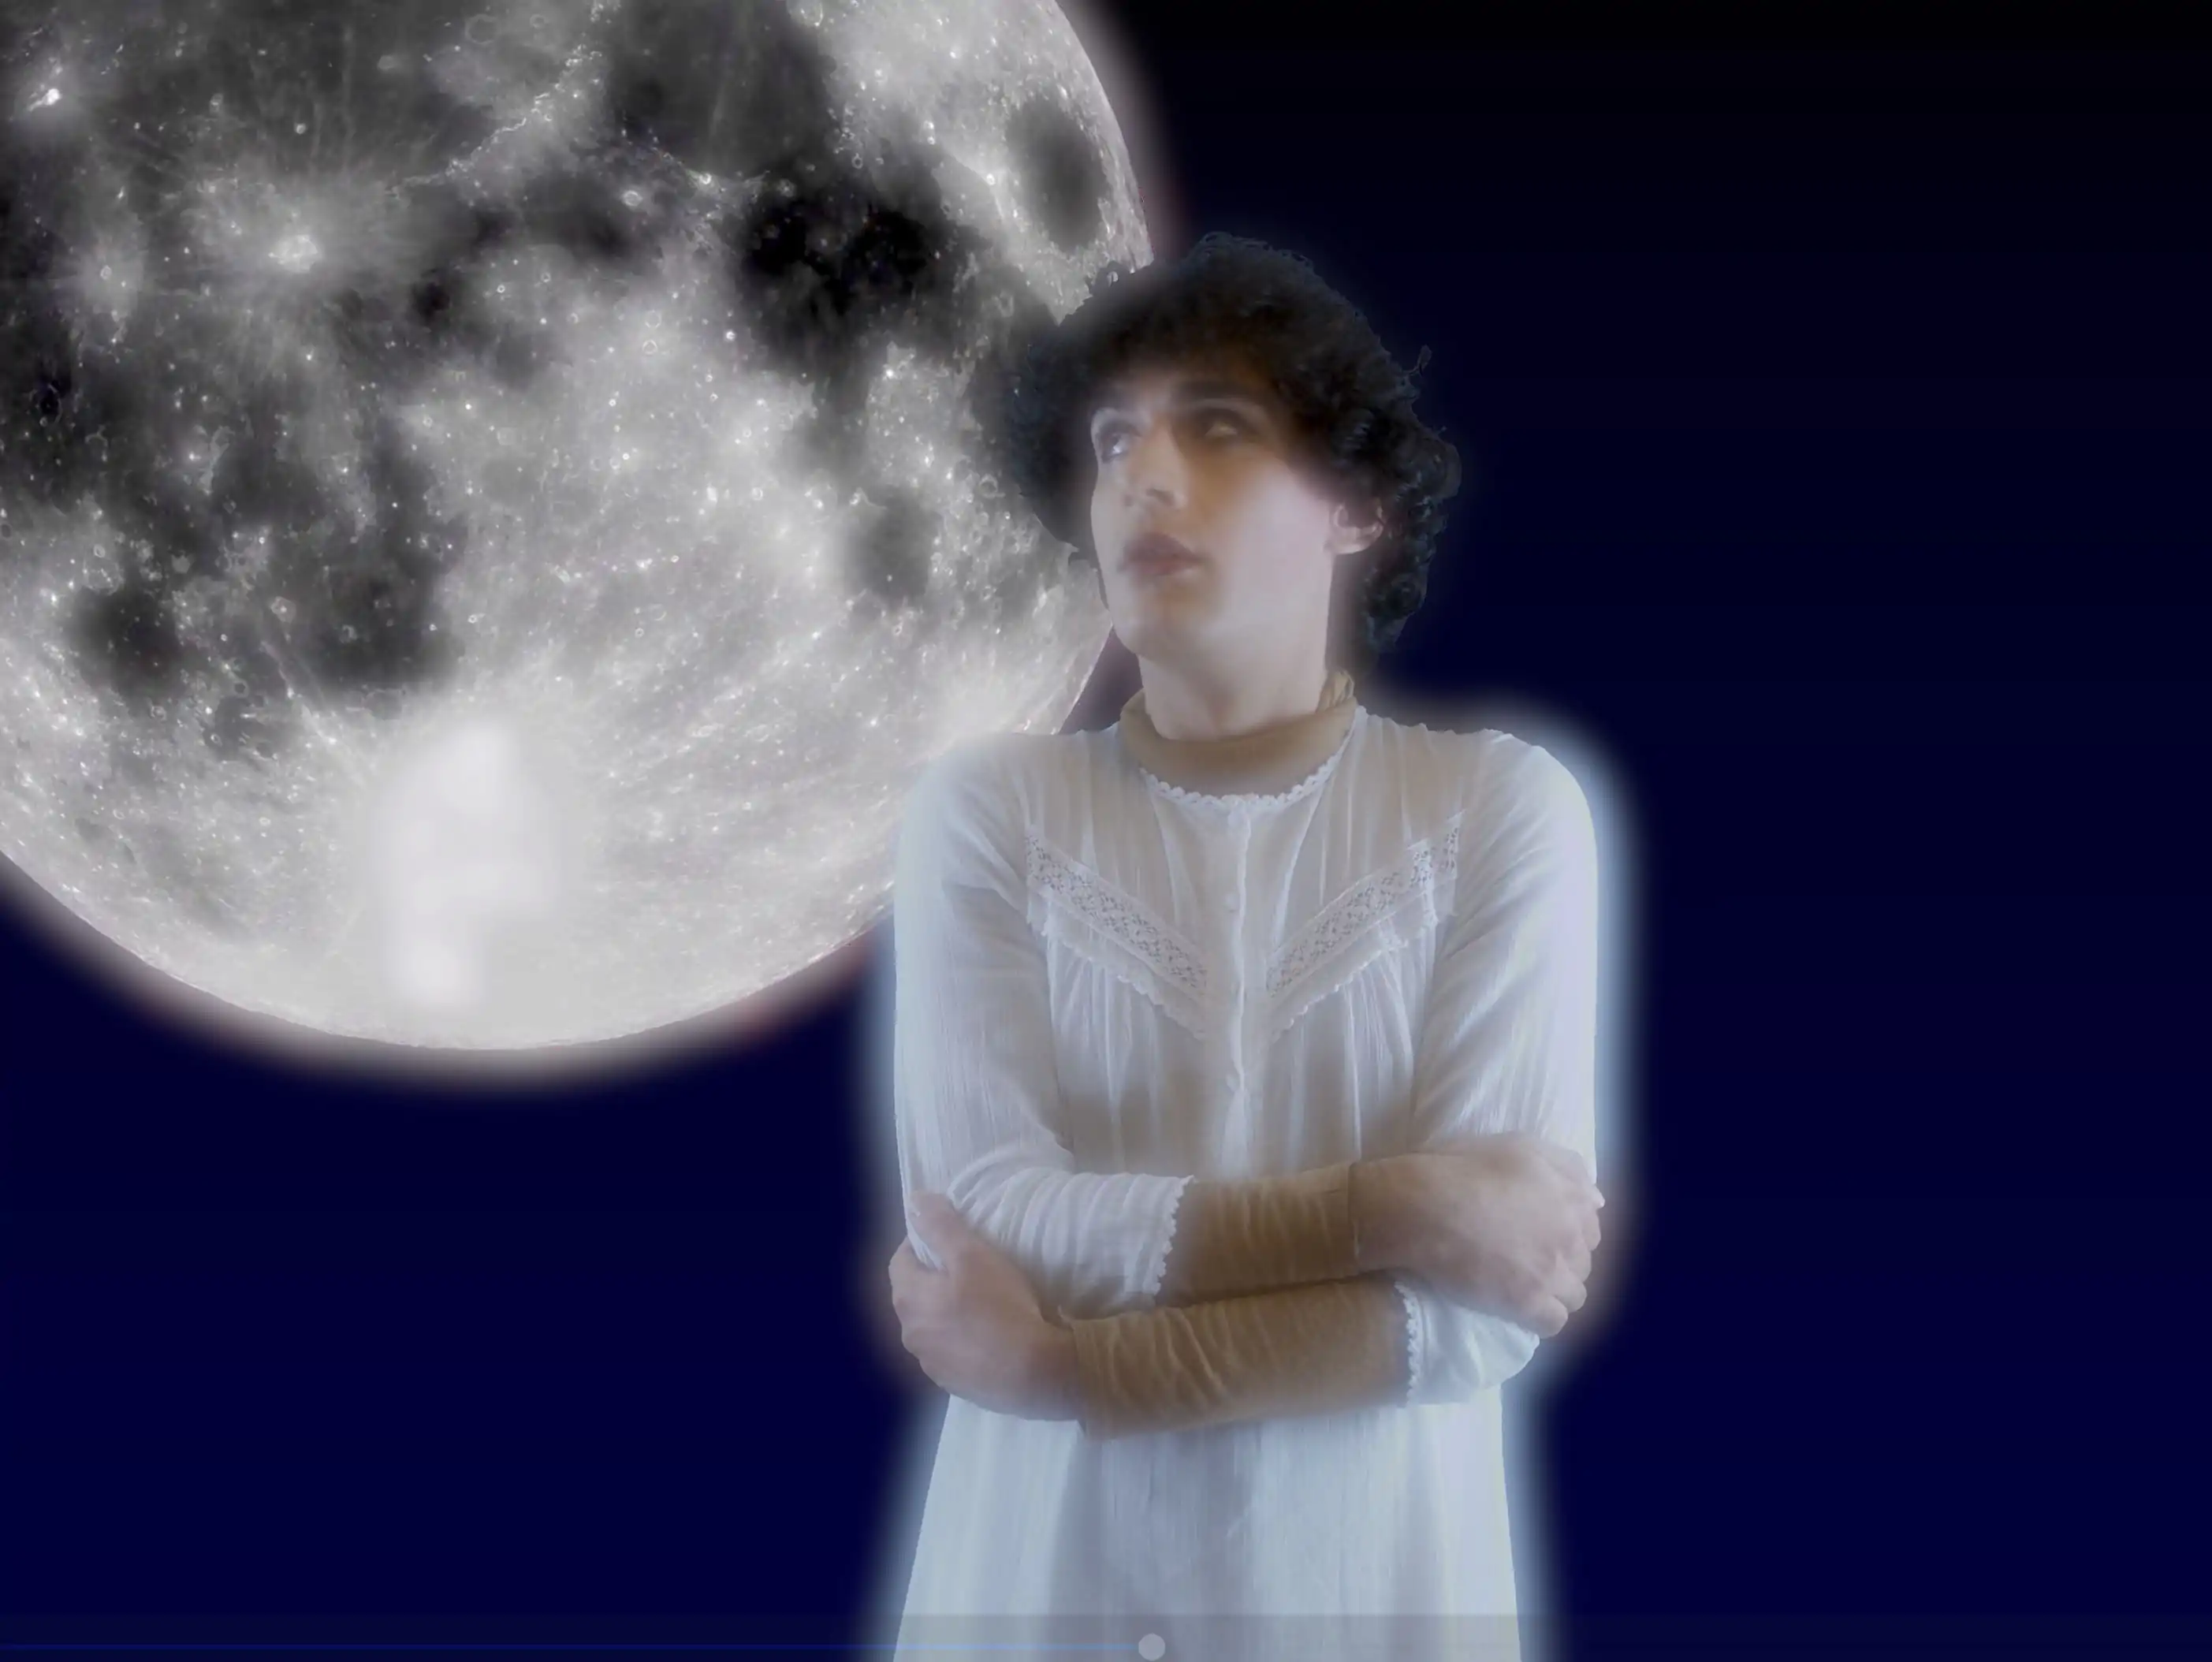 WA in a white dress with the moon looming behind them, it's okay, it's just the moon, it's not going to fall